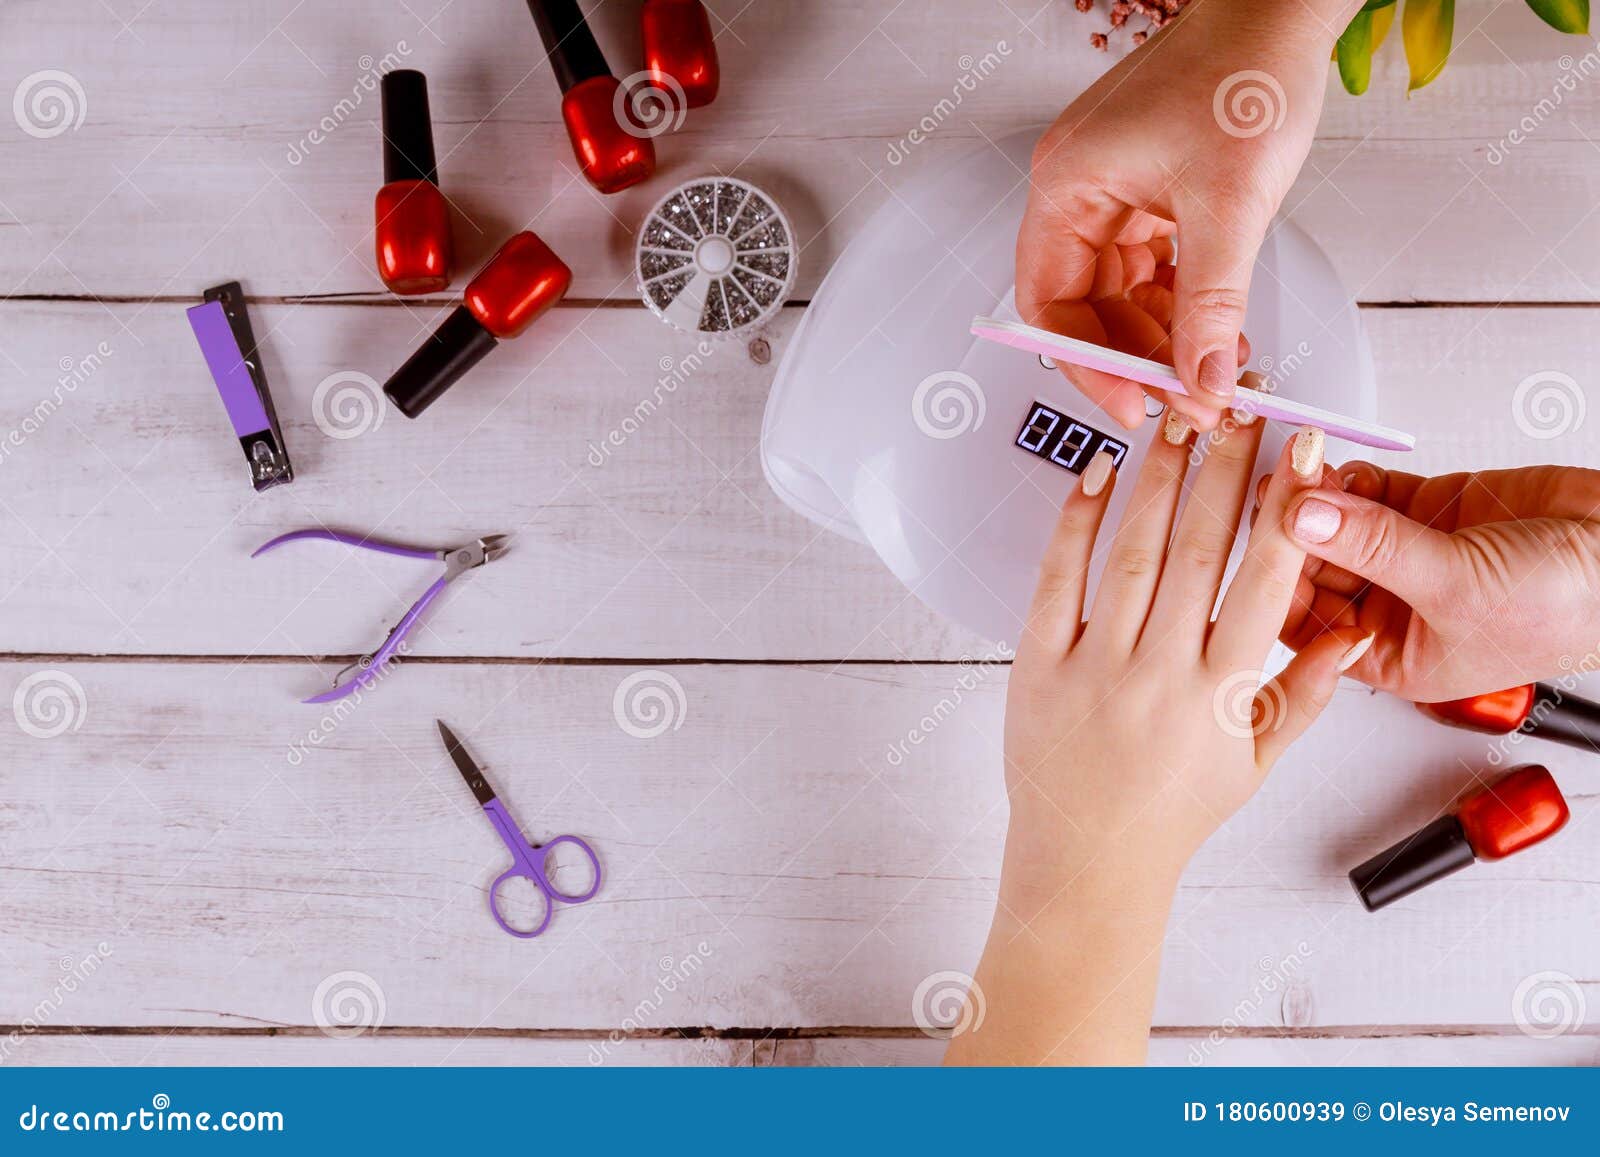 woman making manicure with nail board or nailfile